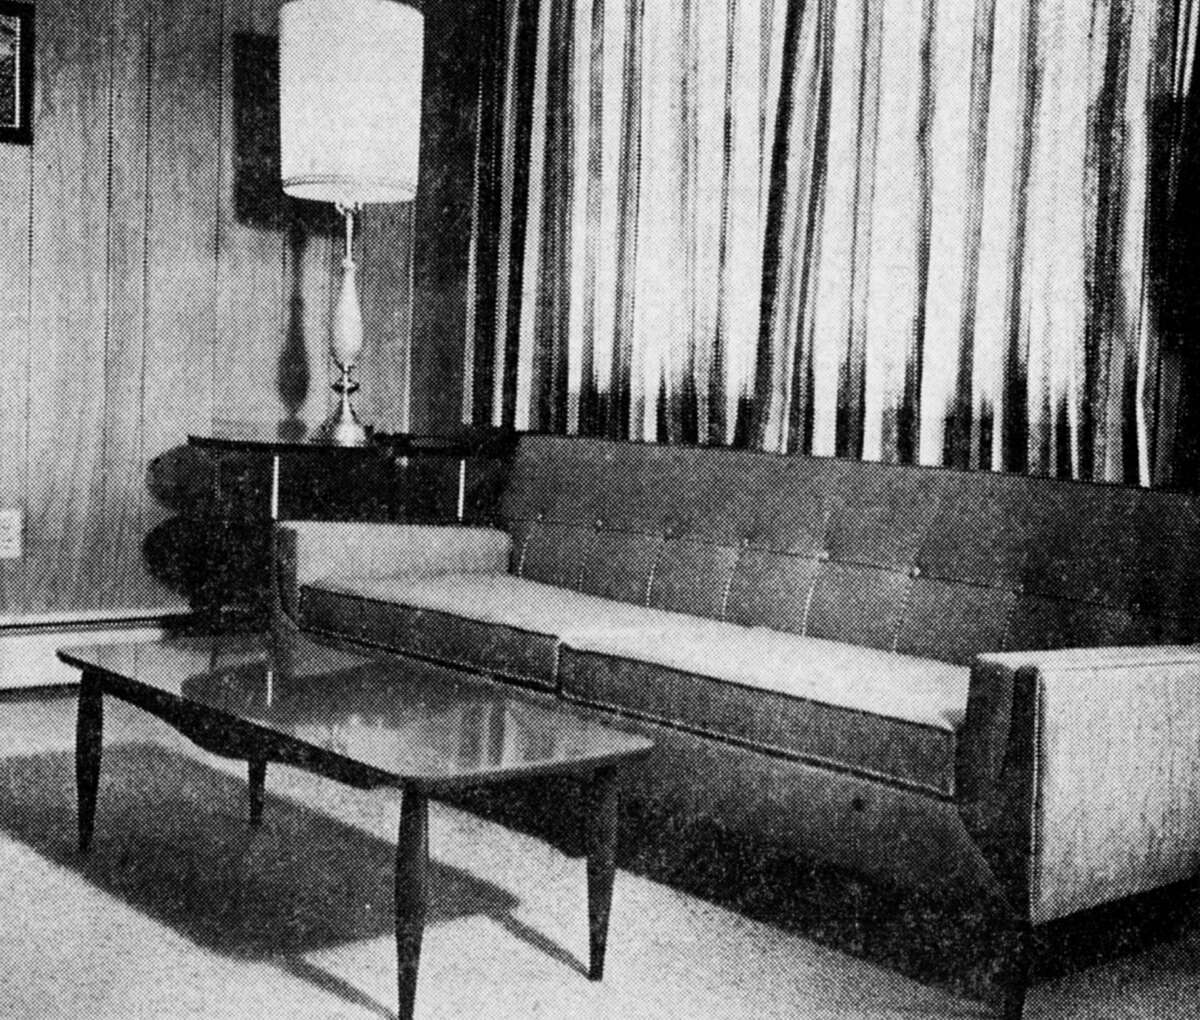 An interior view of the Oakwood Manor Apartments located in Oak Hill is shown. The photo was published in the News Advocate on March 15, 1963.